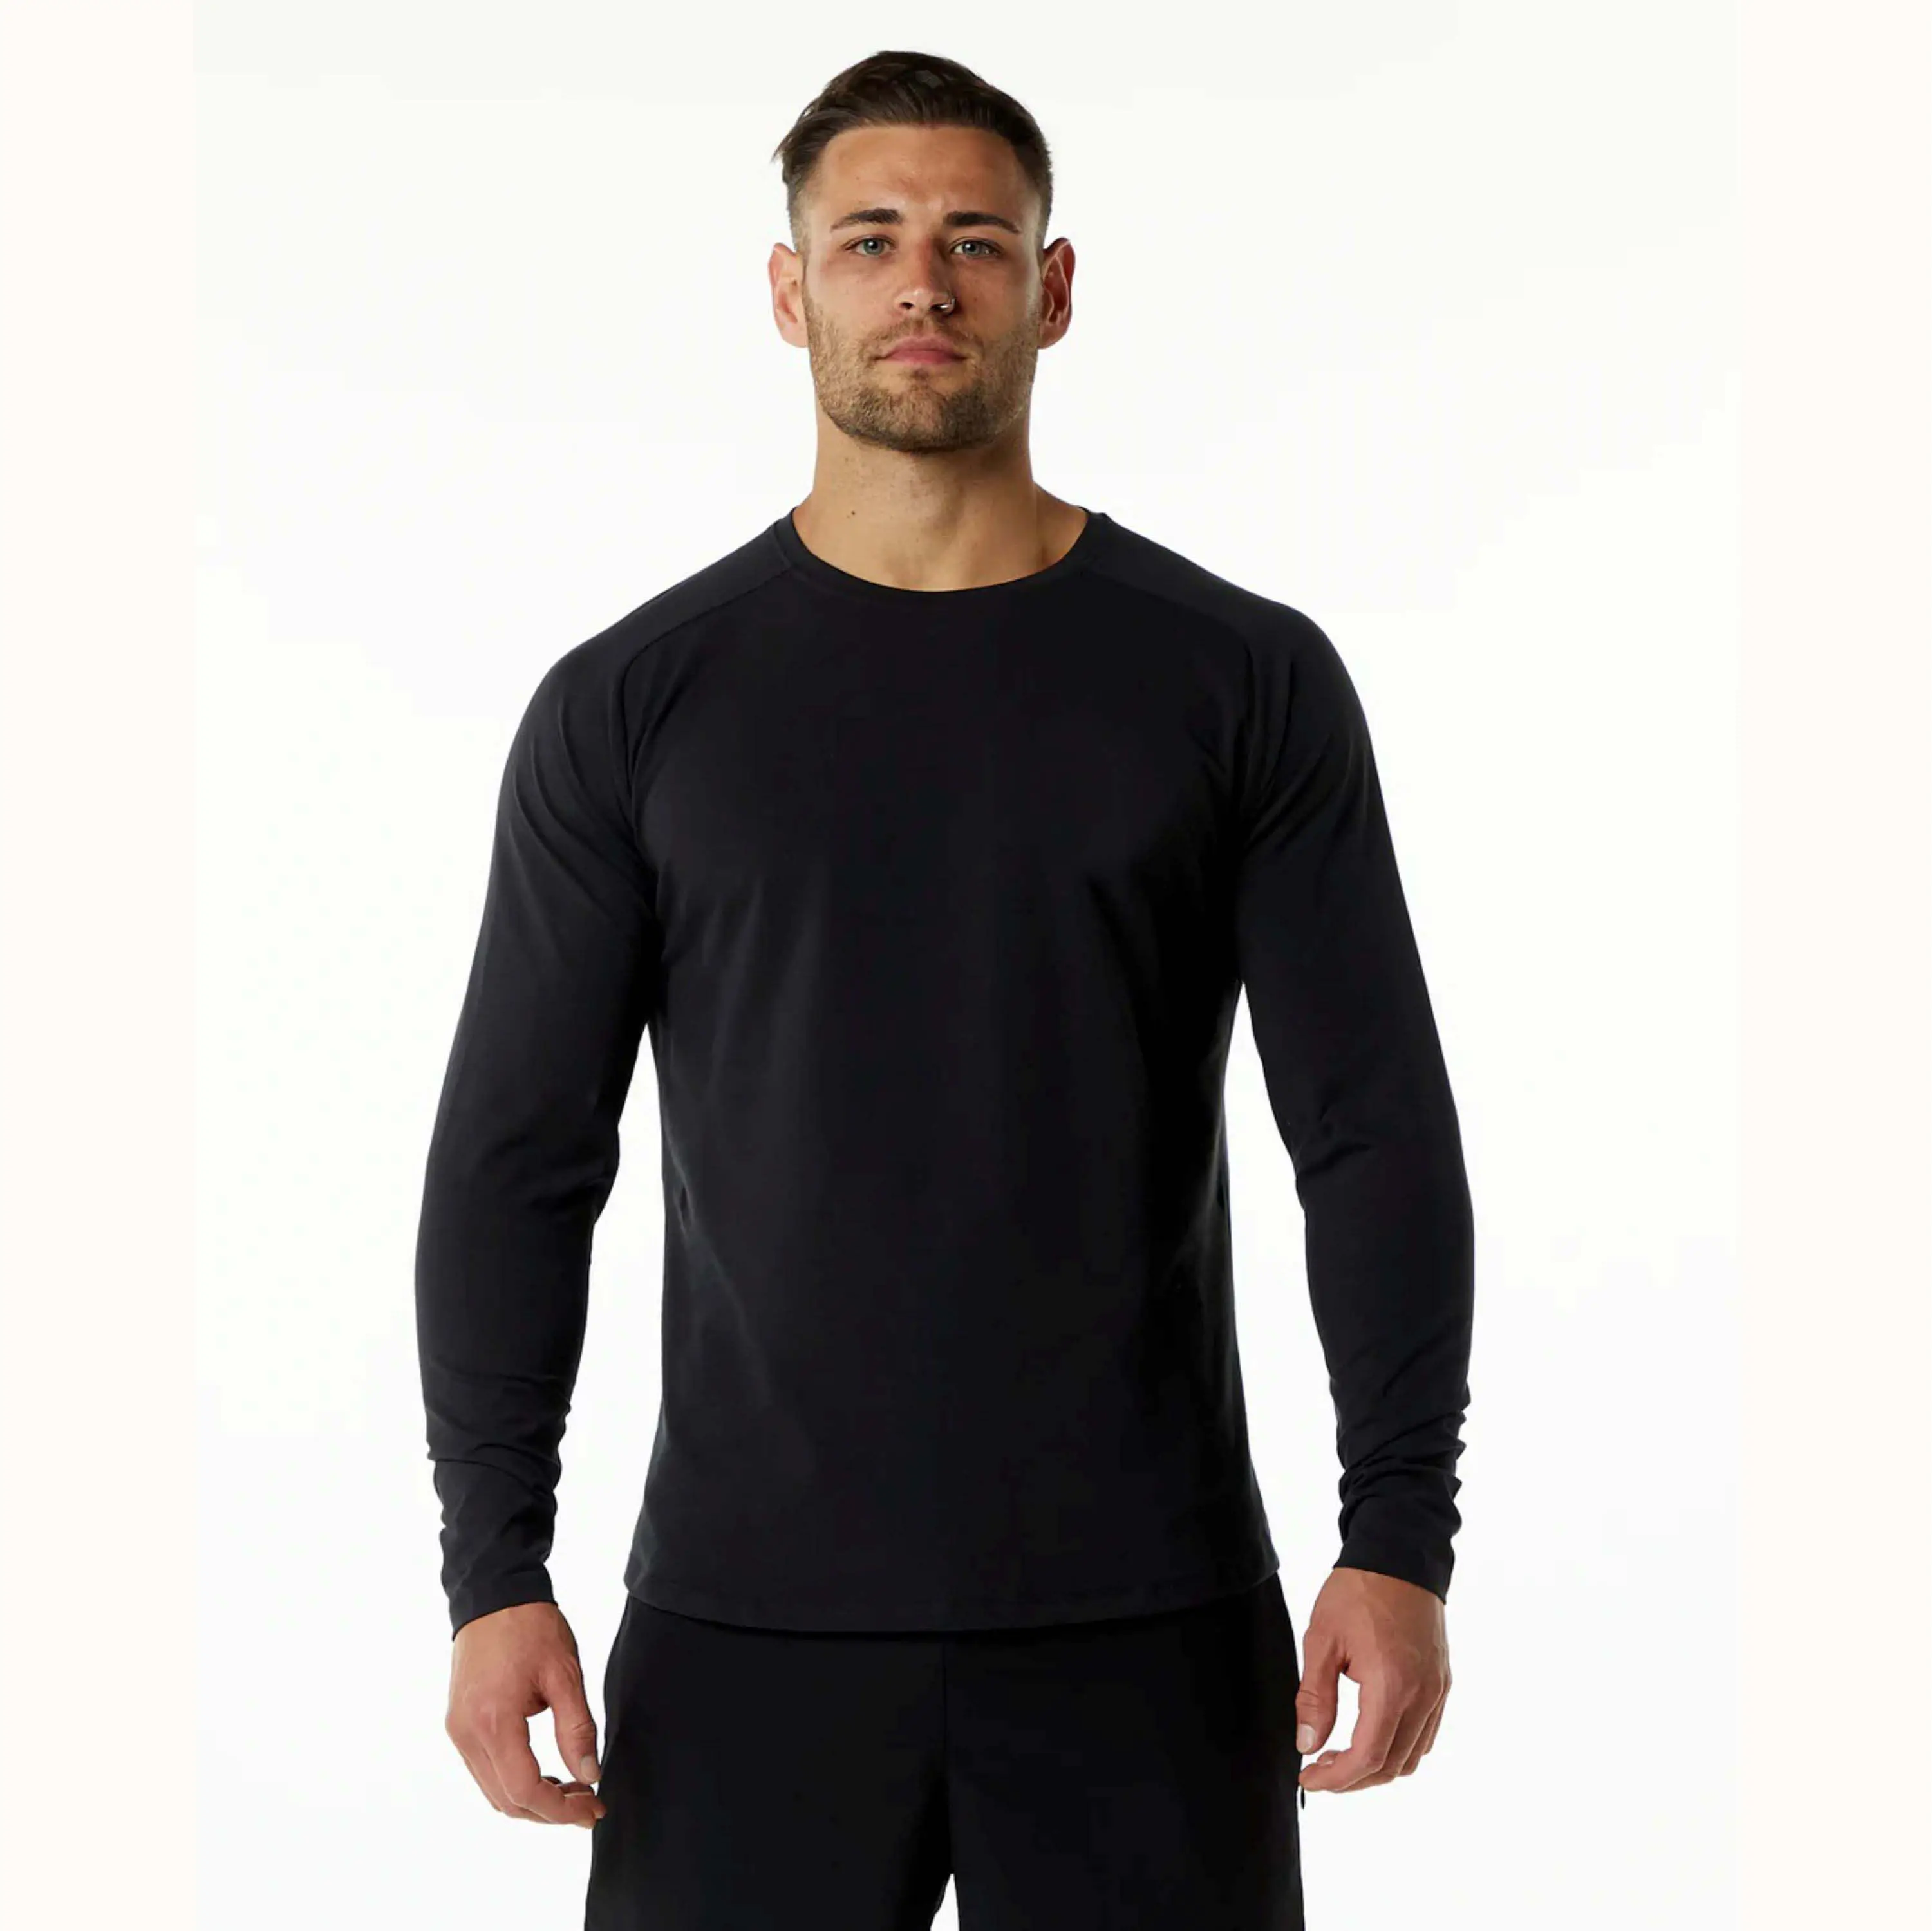 94% Cotton 6% Spandex Saddle Sleeve Cut Tapered Fit Crew Neck Scoop Hem Black Mens Fitted Performance Long Sleeve T-Shirt